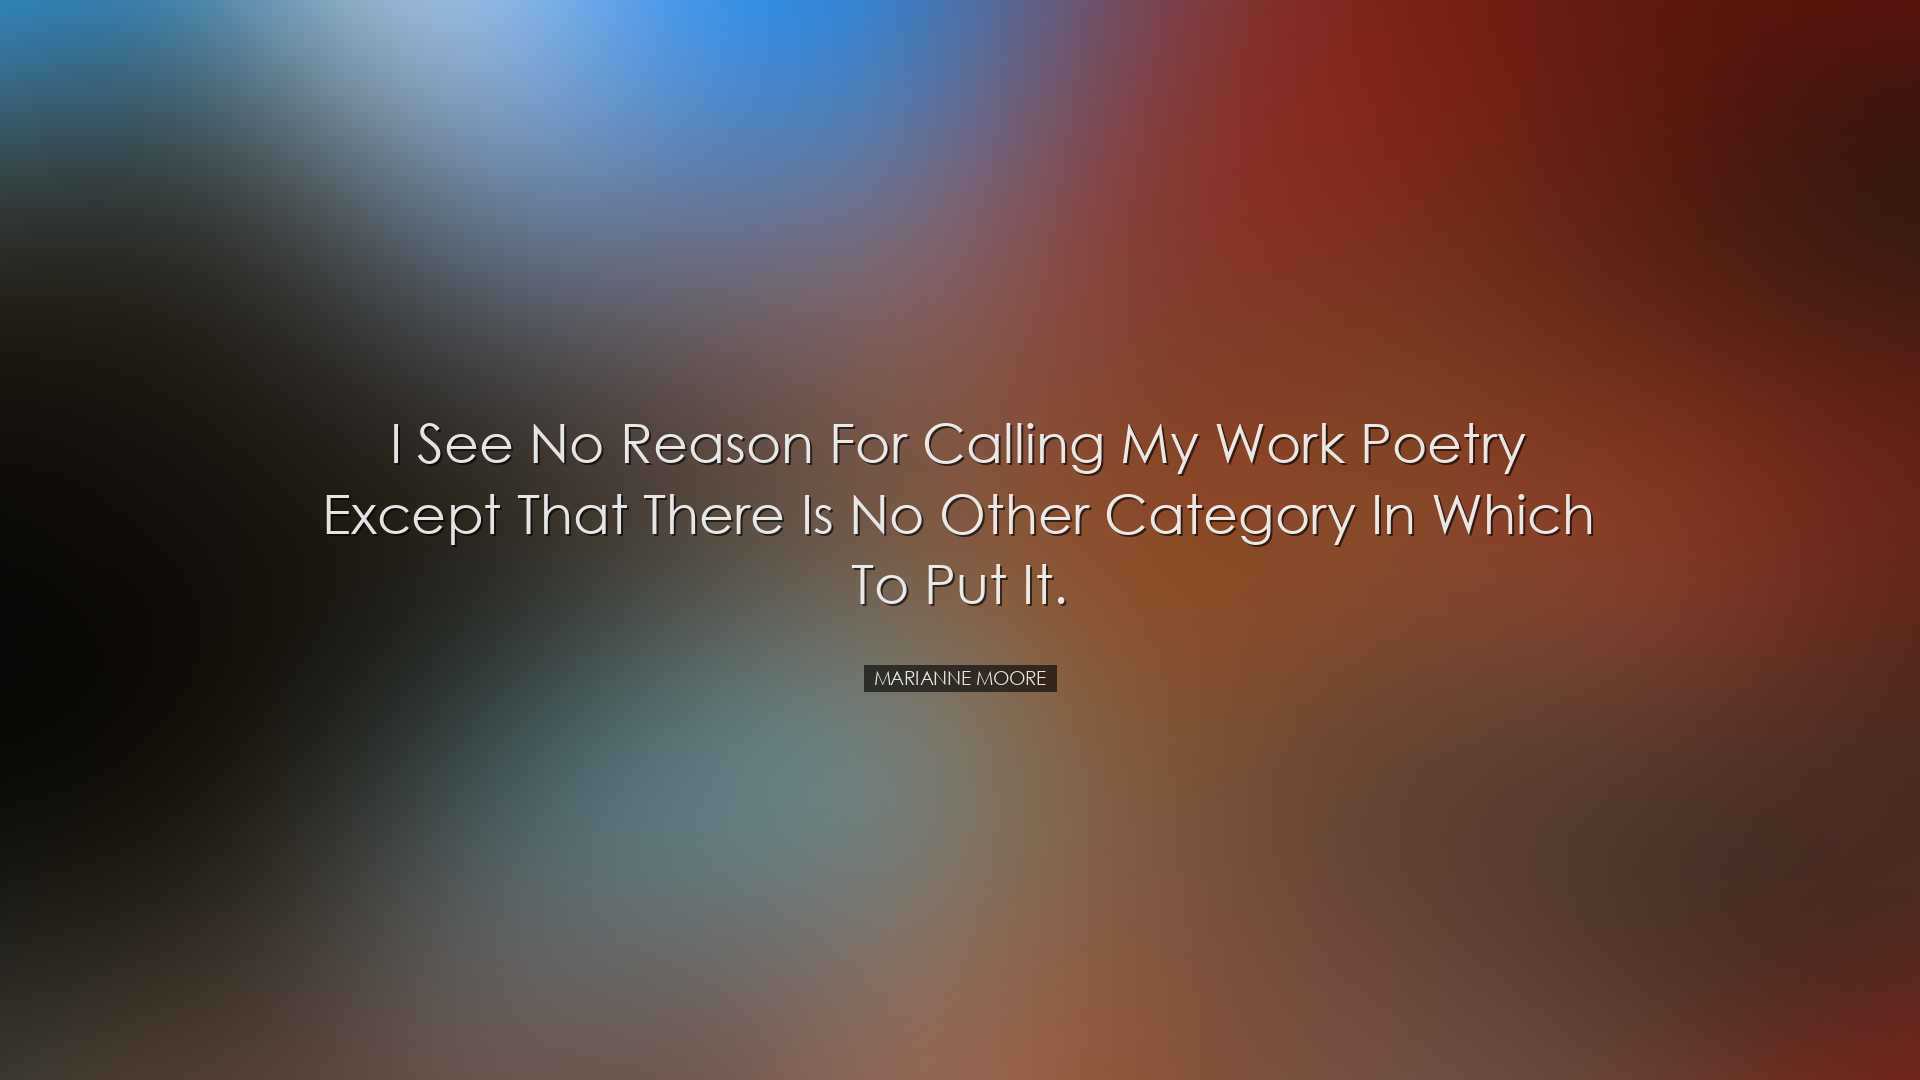 I see no reason for calling my work poetry except that there is no